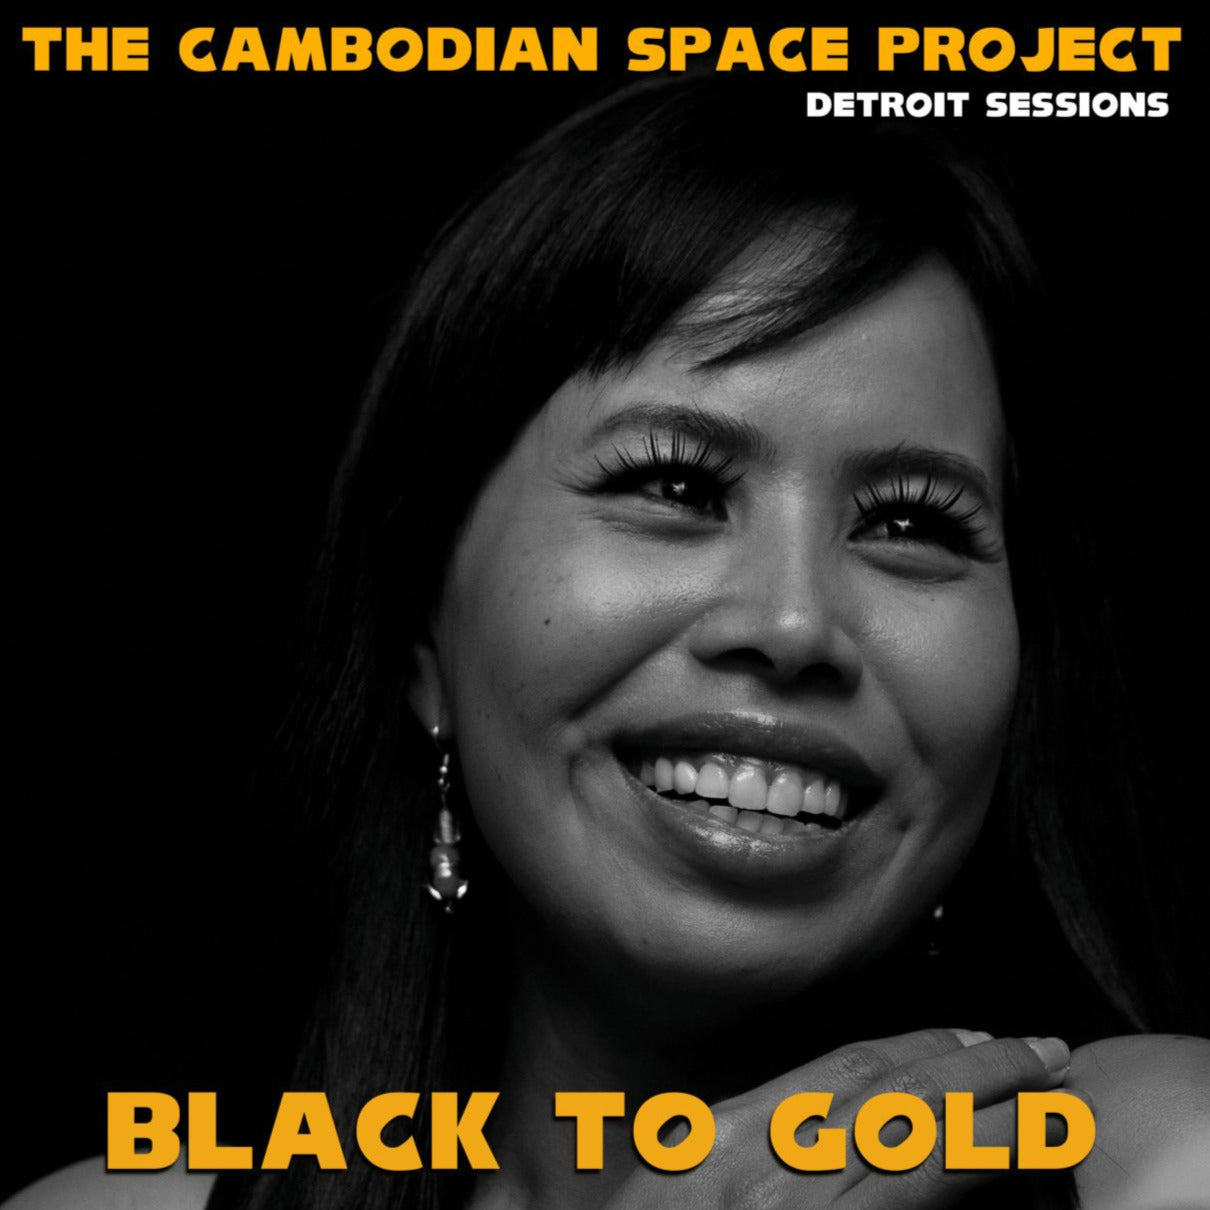 THE CAMBODIAN SPACE PROJECT - "BLACK TO GOLD" LP